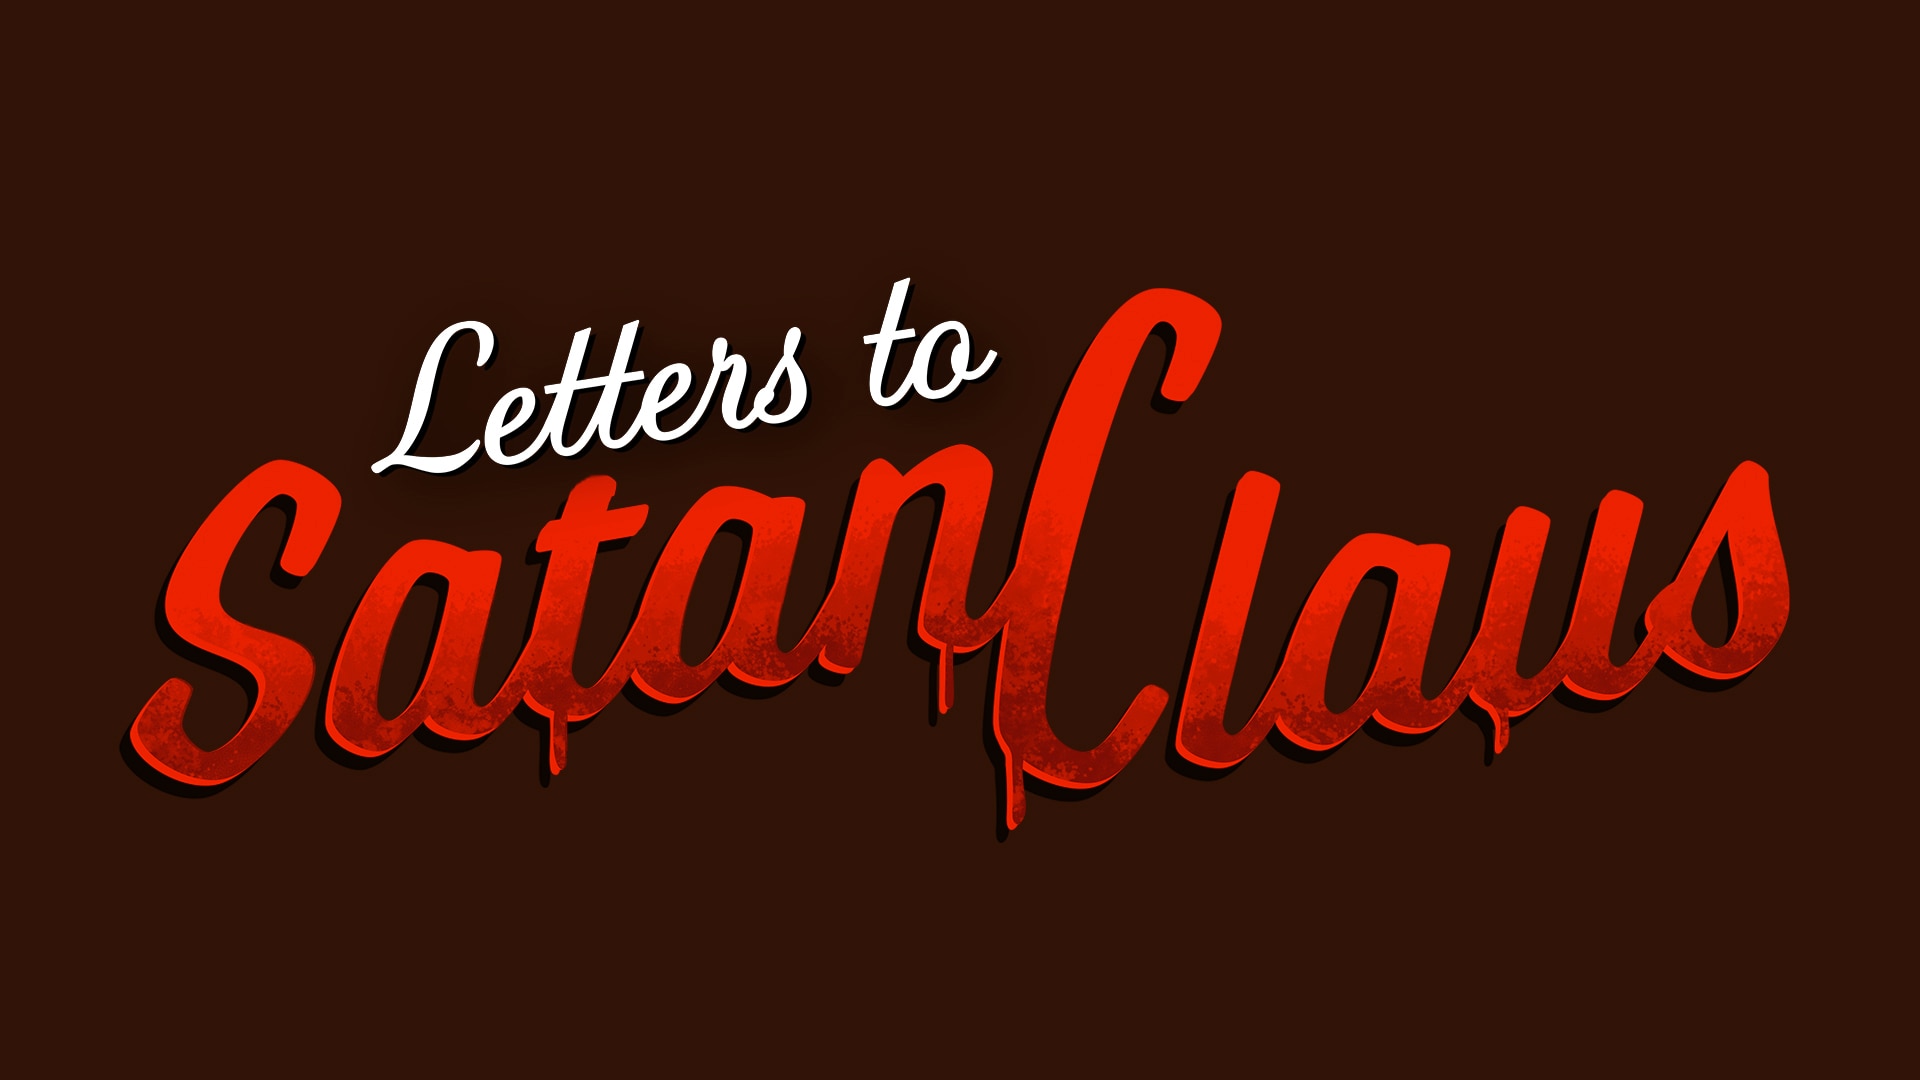 2020 Letters To Satan Claus